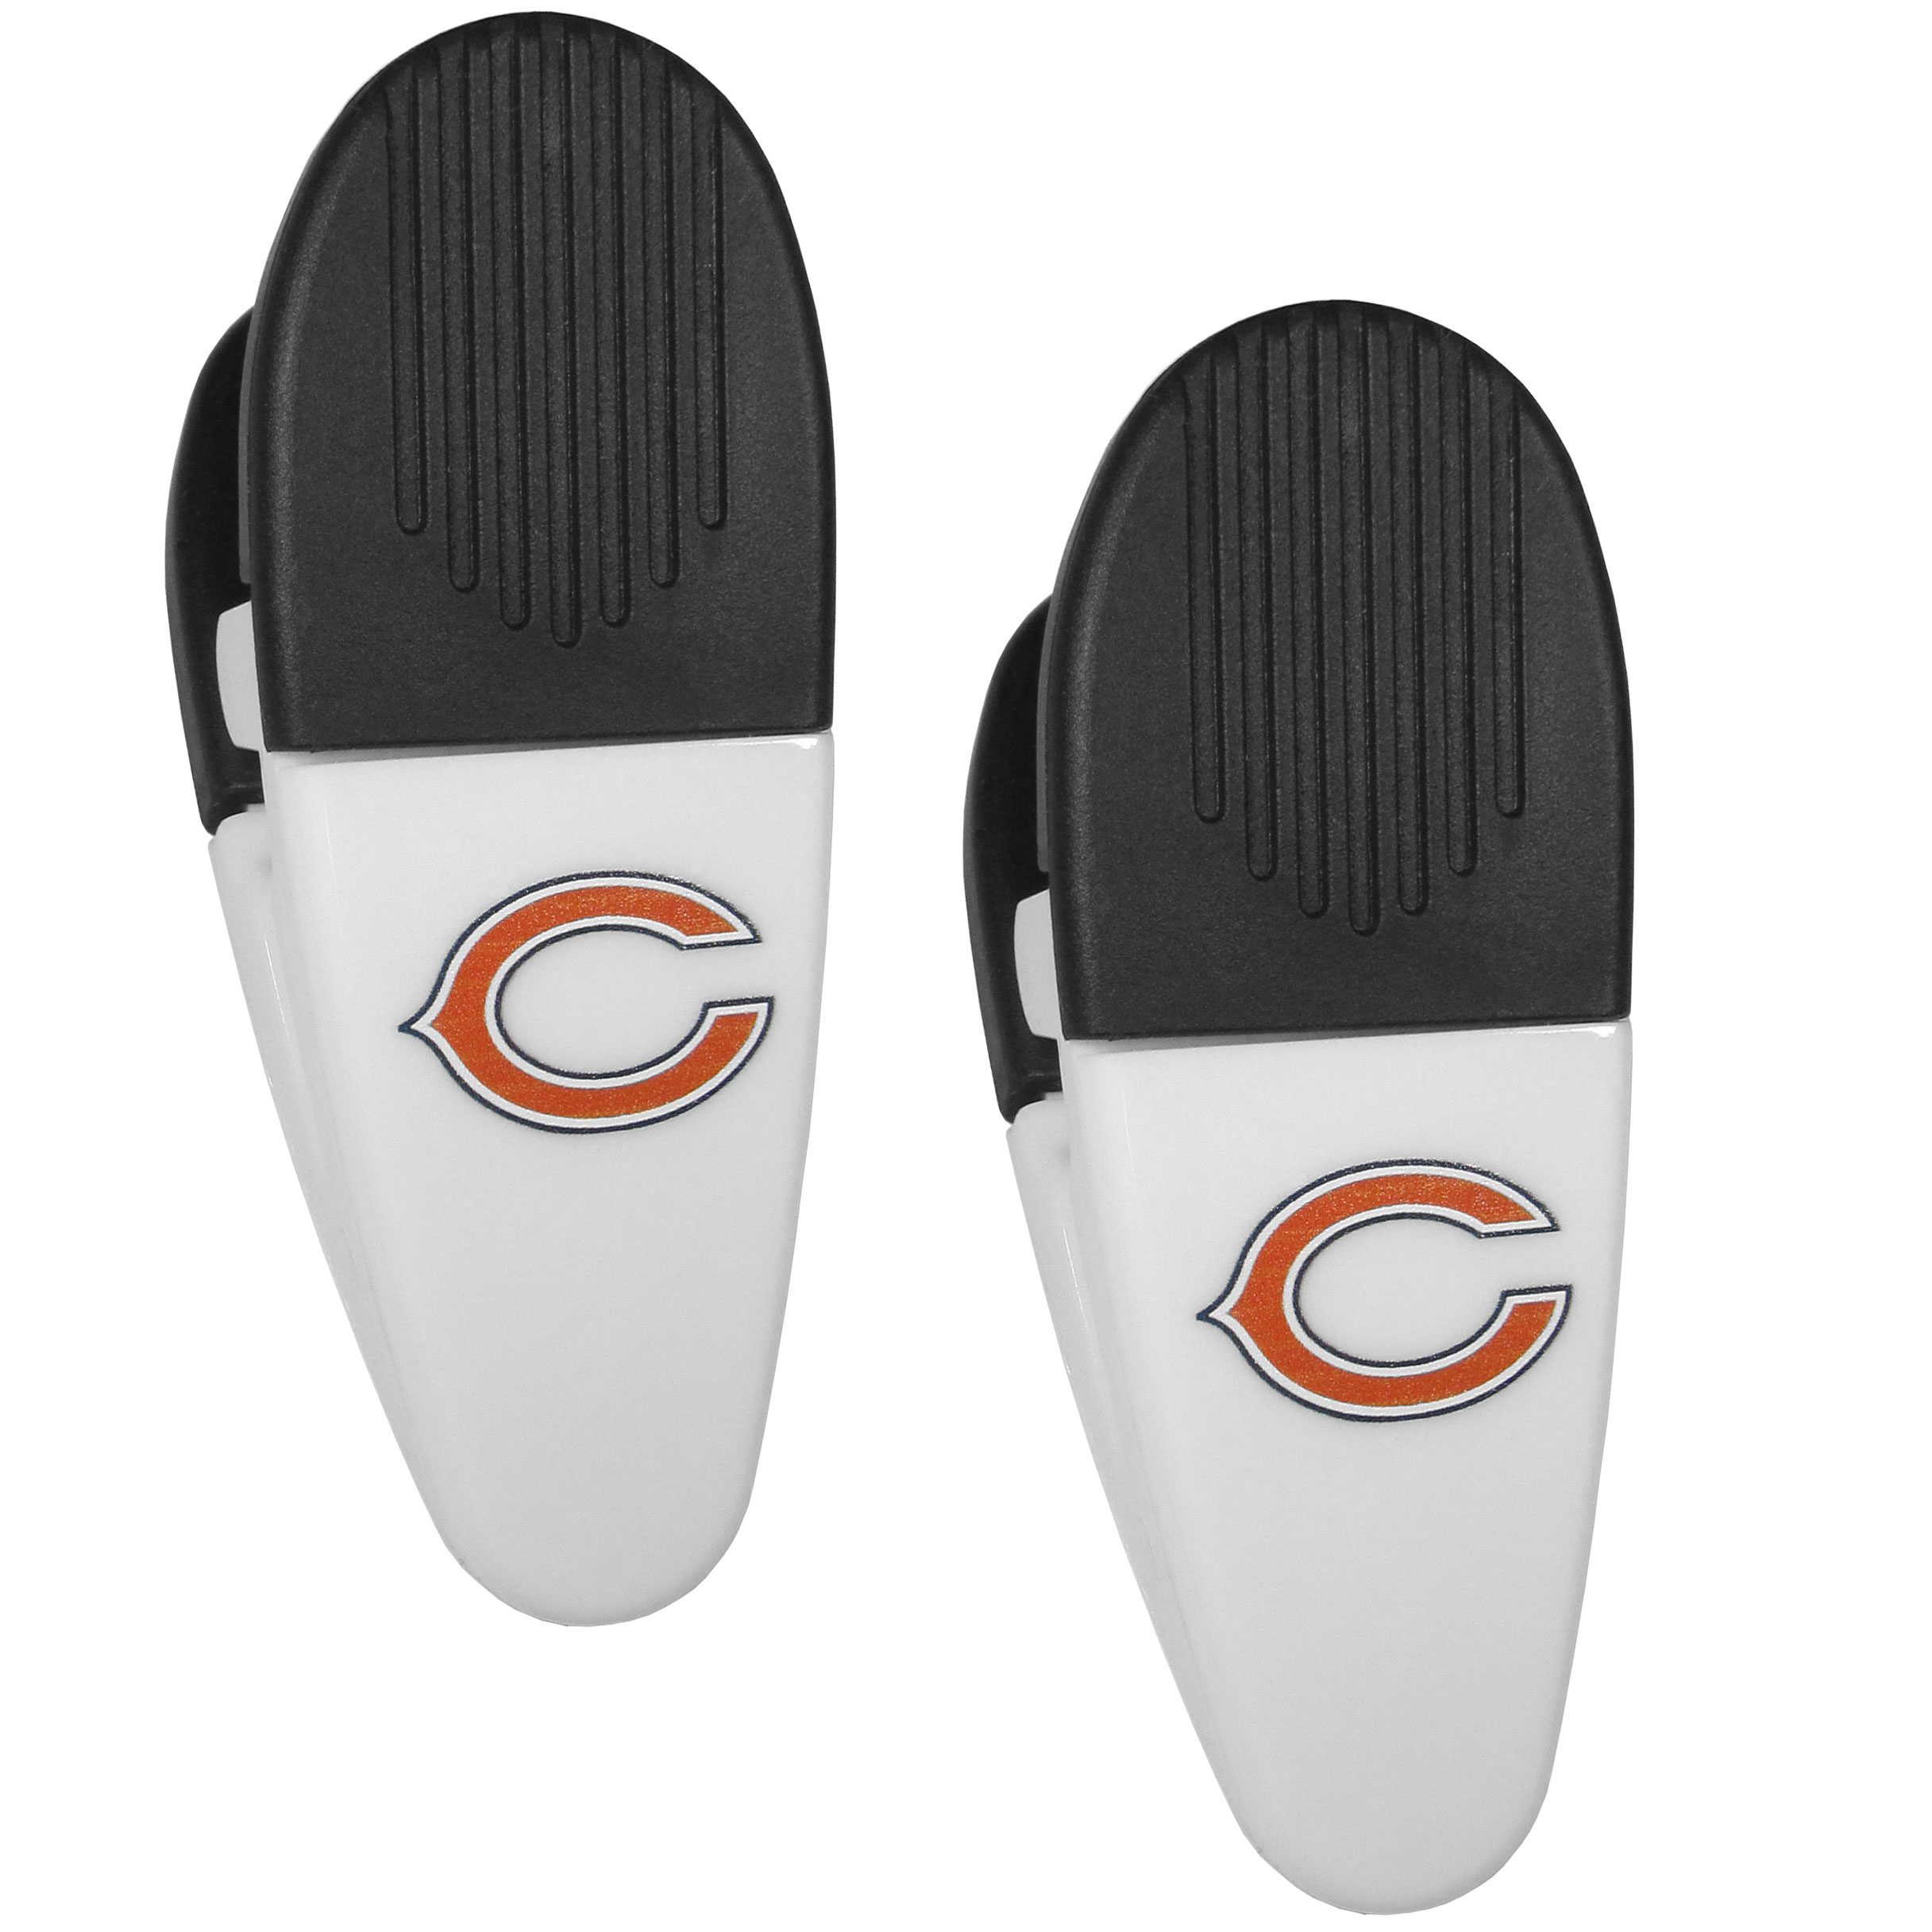 Chicago Bears Chip Clips 2 Pack